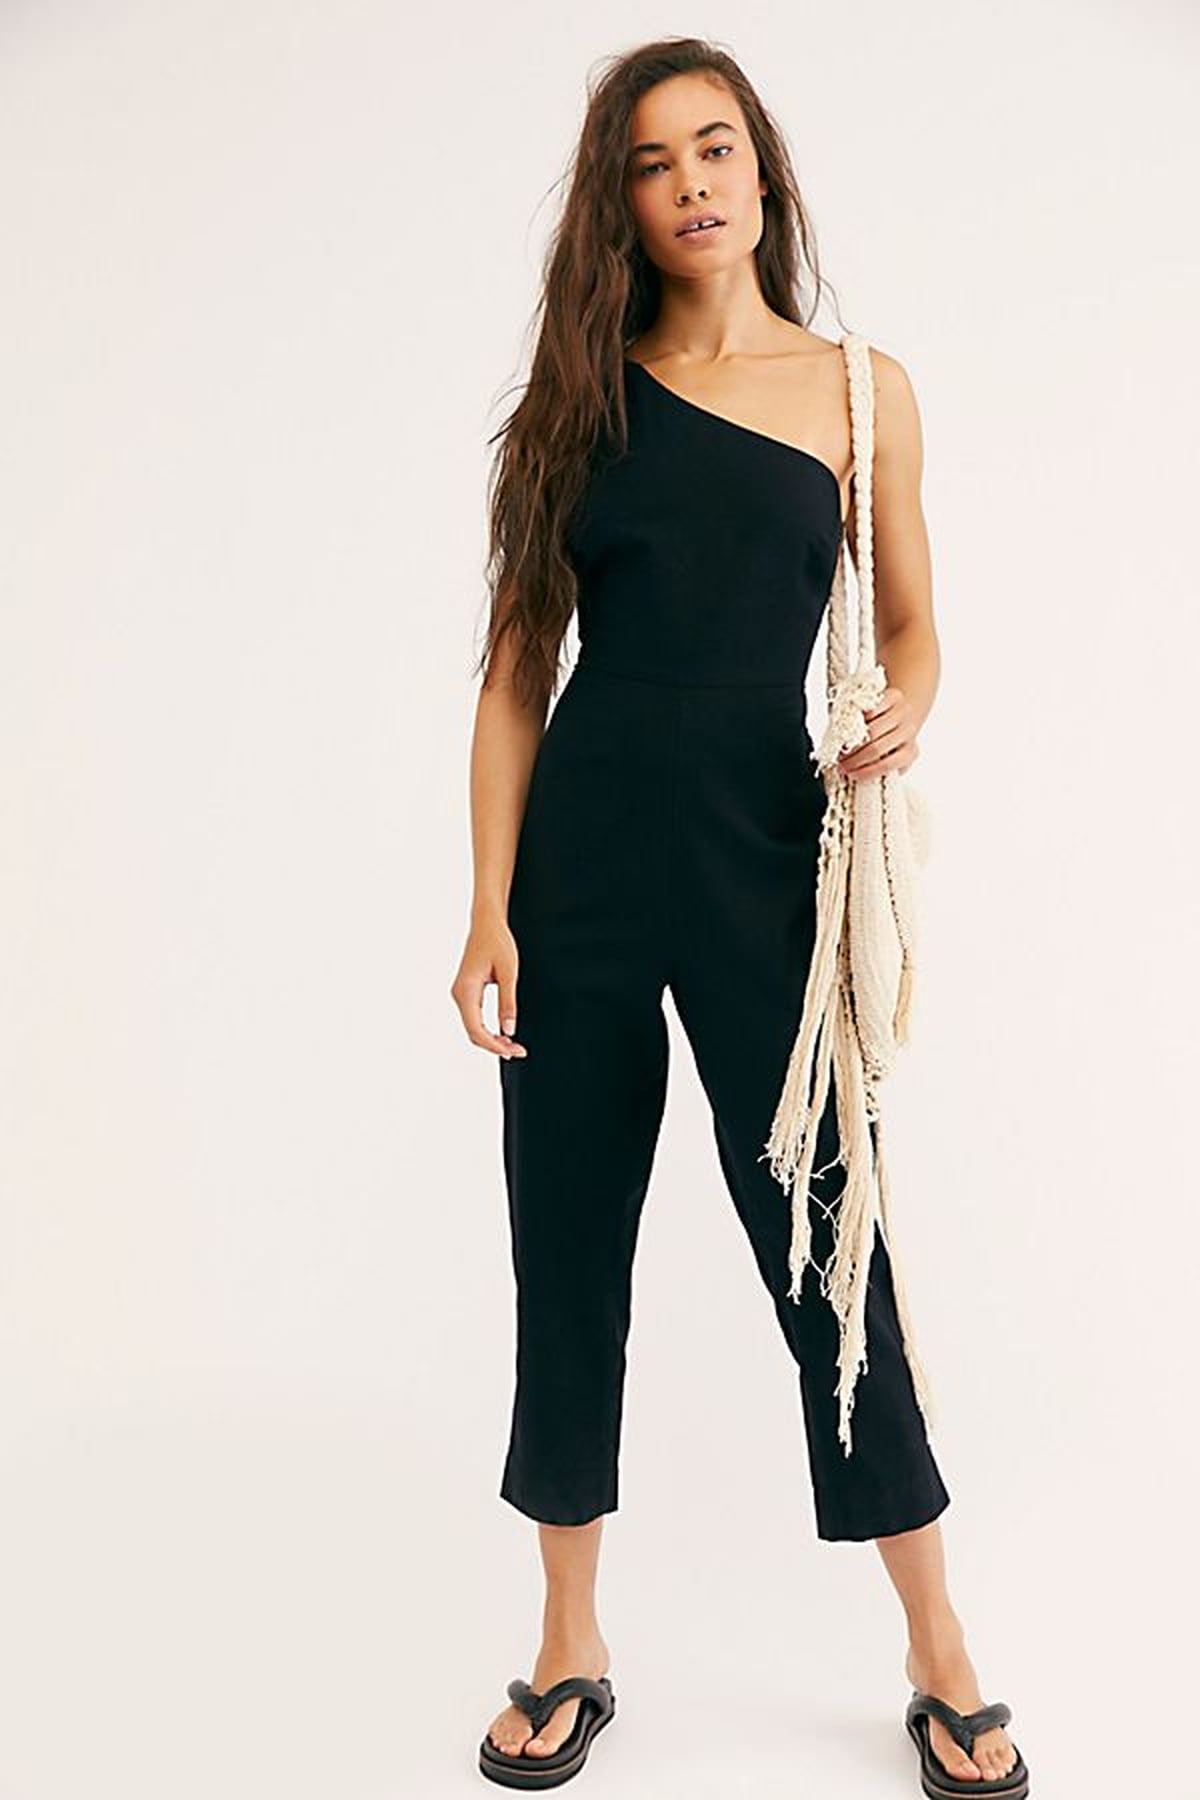 Best Free People Rompers and Jumpsuits | POPSUGAR Fashion